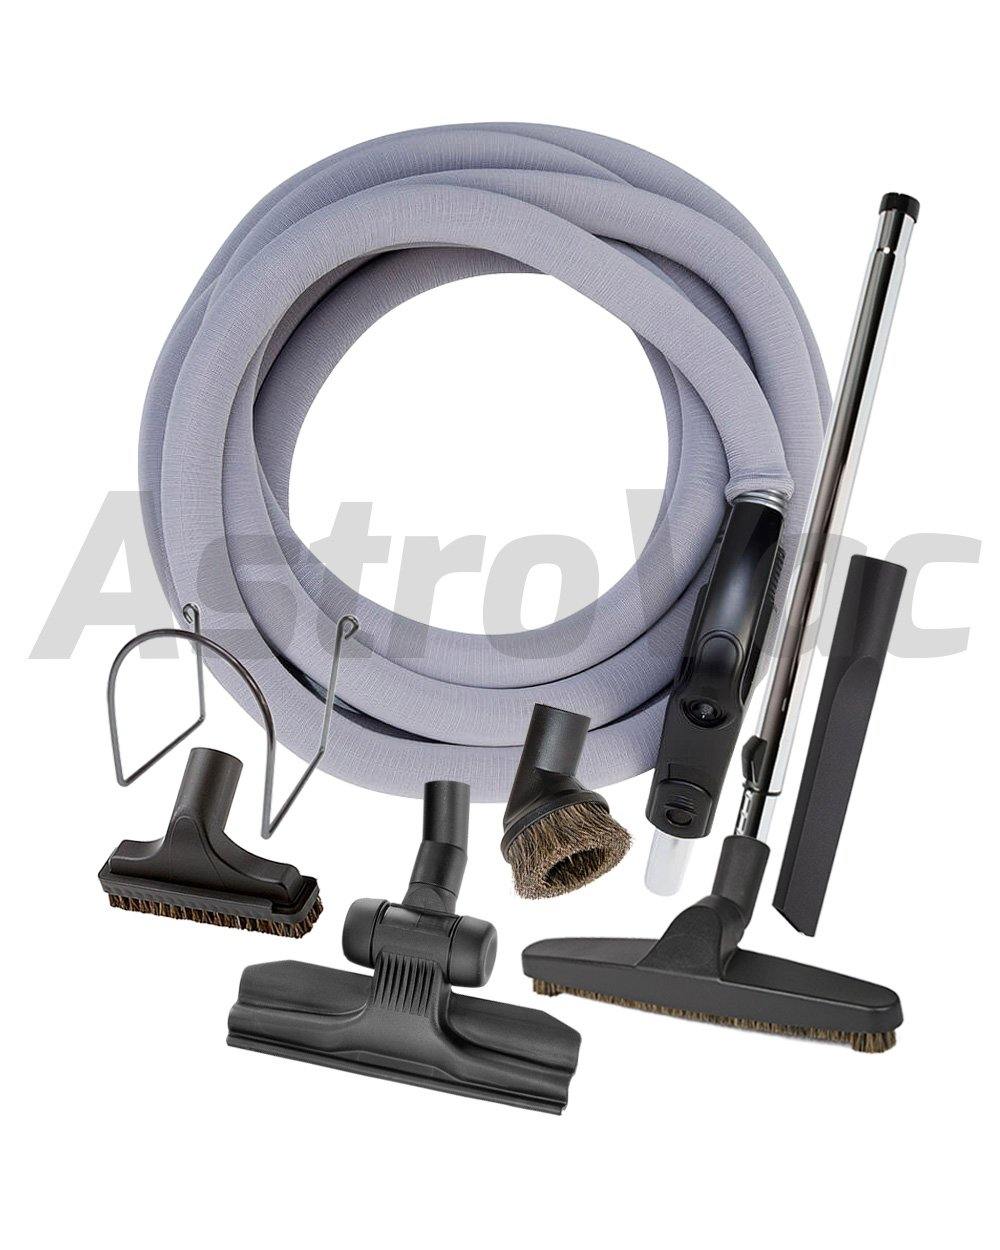 Switch Hose Ezyglide Tool Kit with Protective Cover | 12M - AstroVac Ducted Vacuum Warehouse